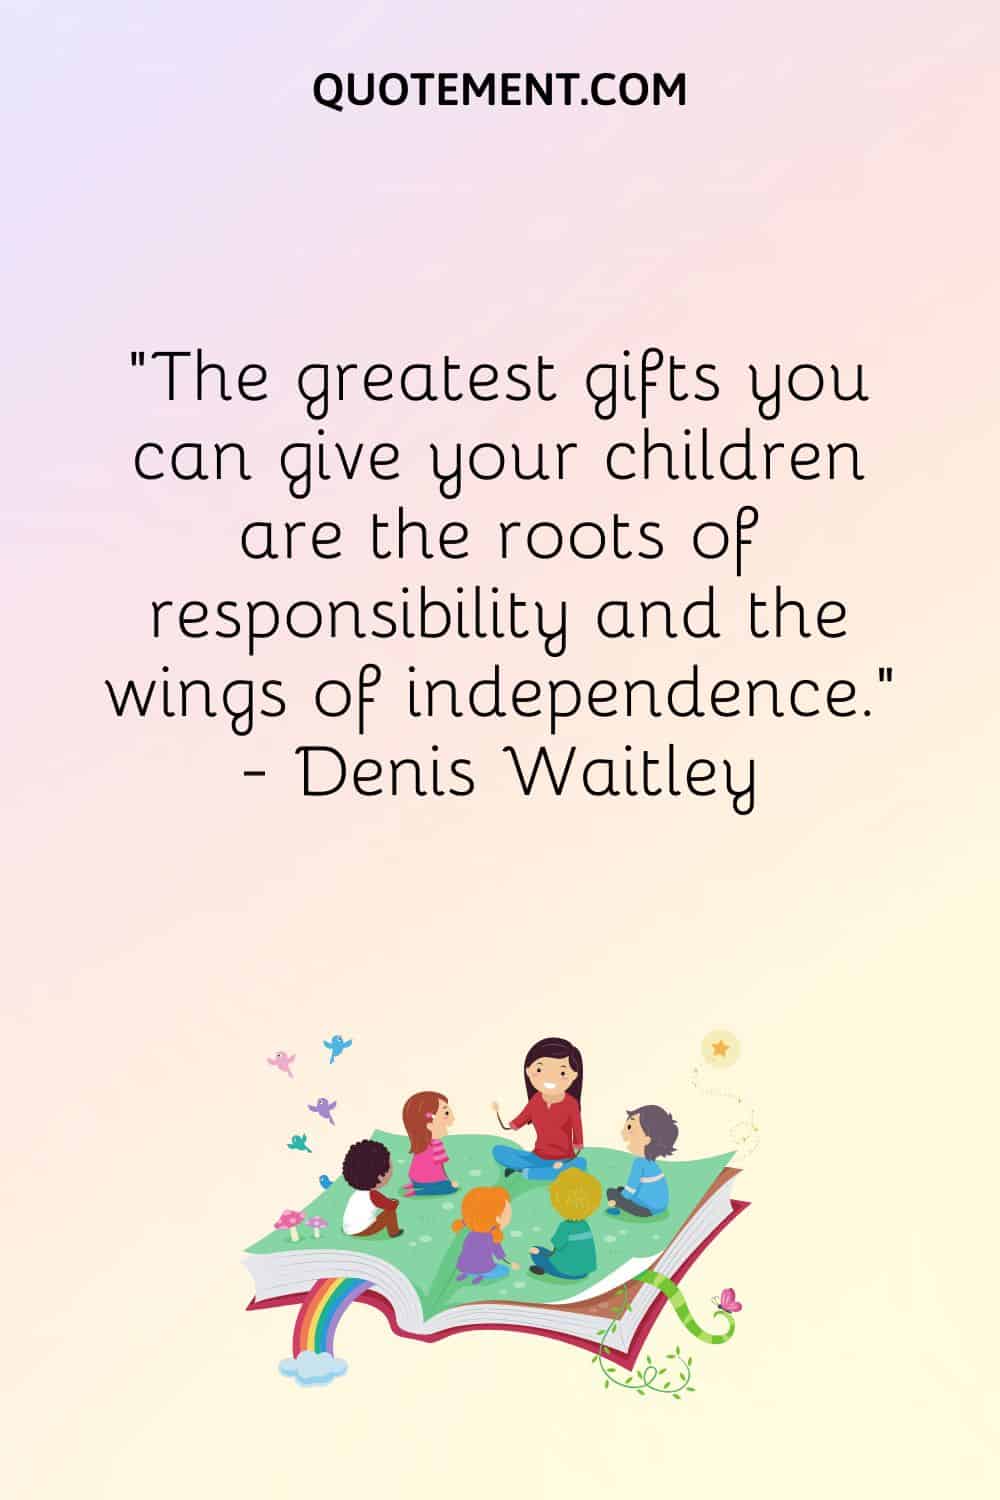 The greatest gifts you can give your children are the roots of responsibility and the wings of independence